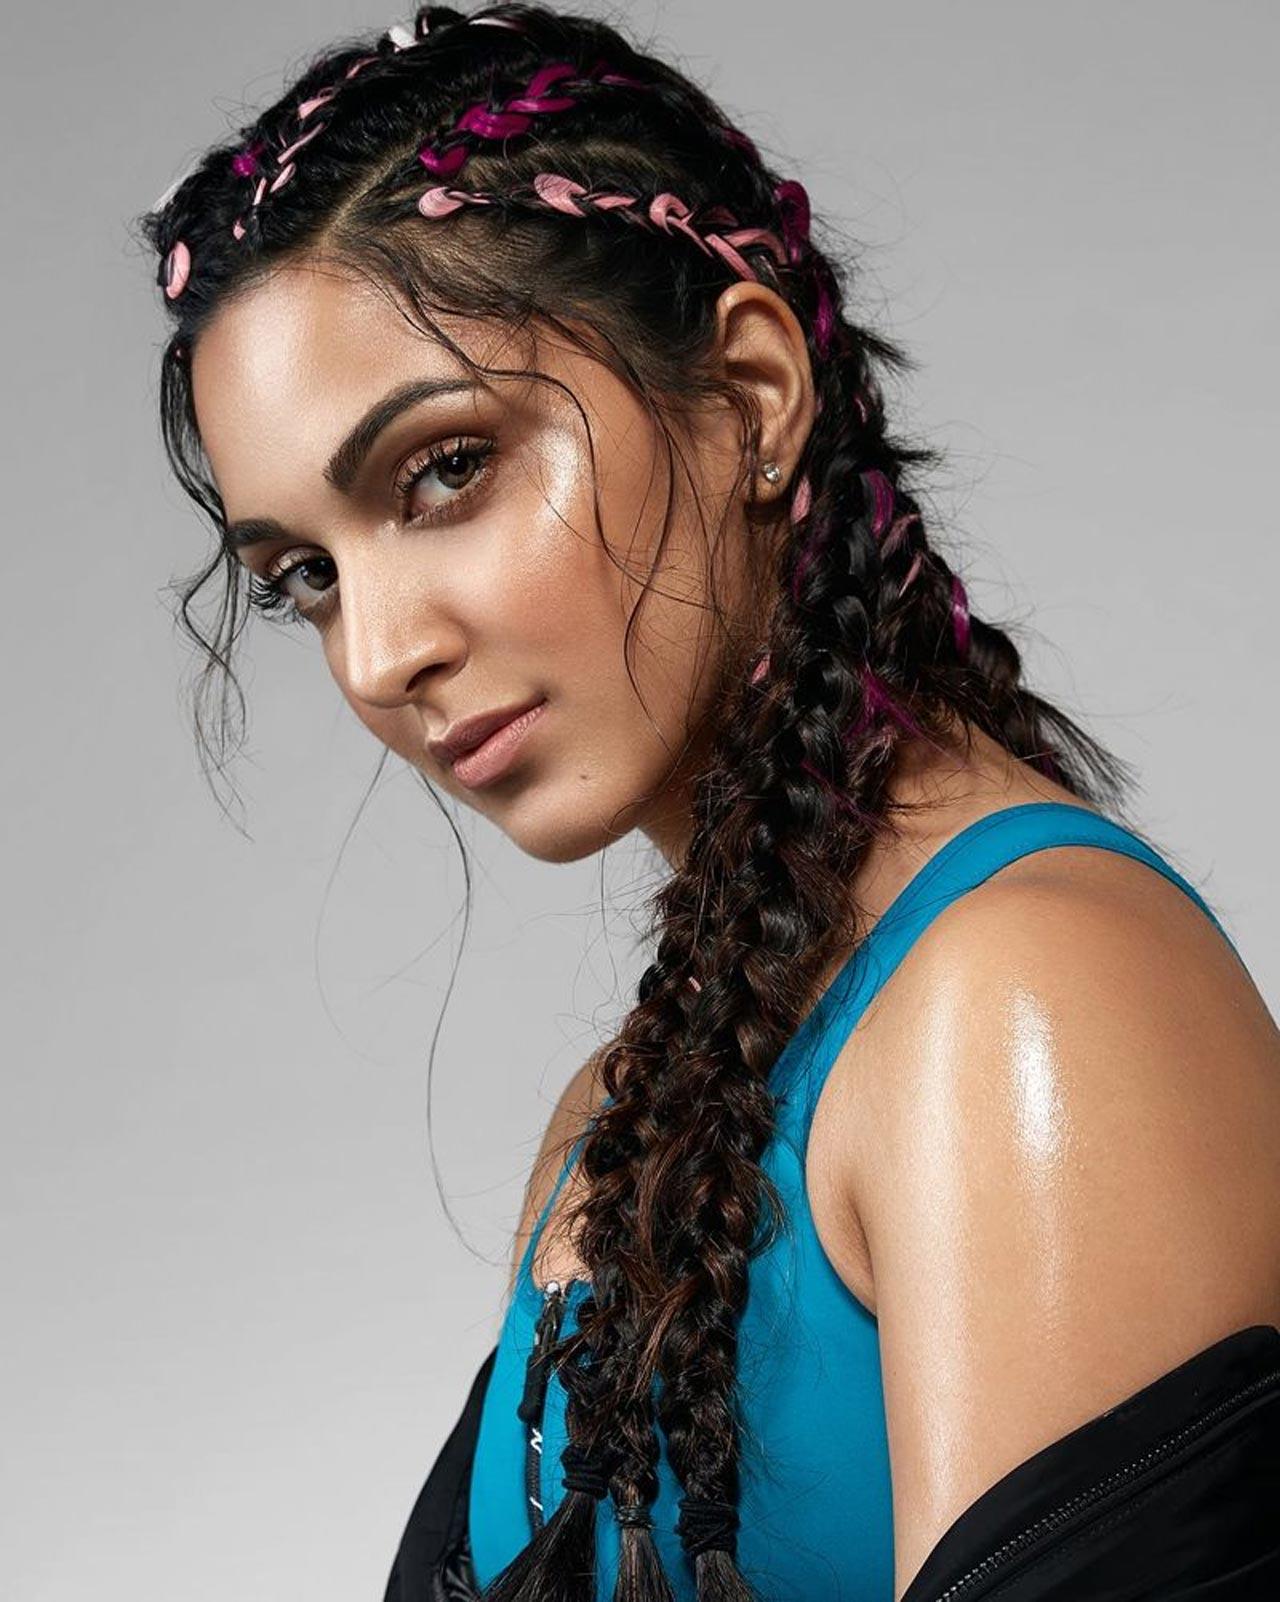 Kiara Advani being the new age actress has done a lot of work in the industry and therefore is followed by many people for her styling. In this, she looks stunning in her messy bohemian braid which compliments her minimal attire to the T